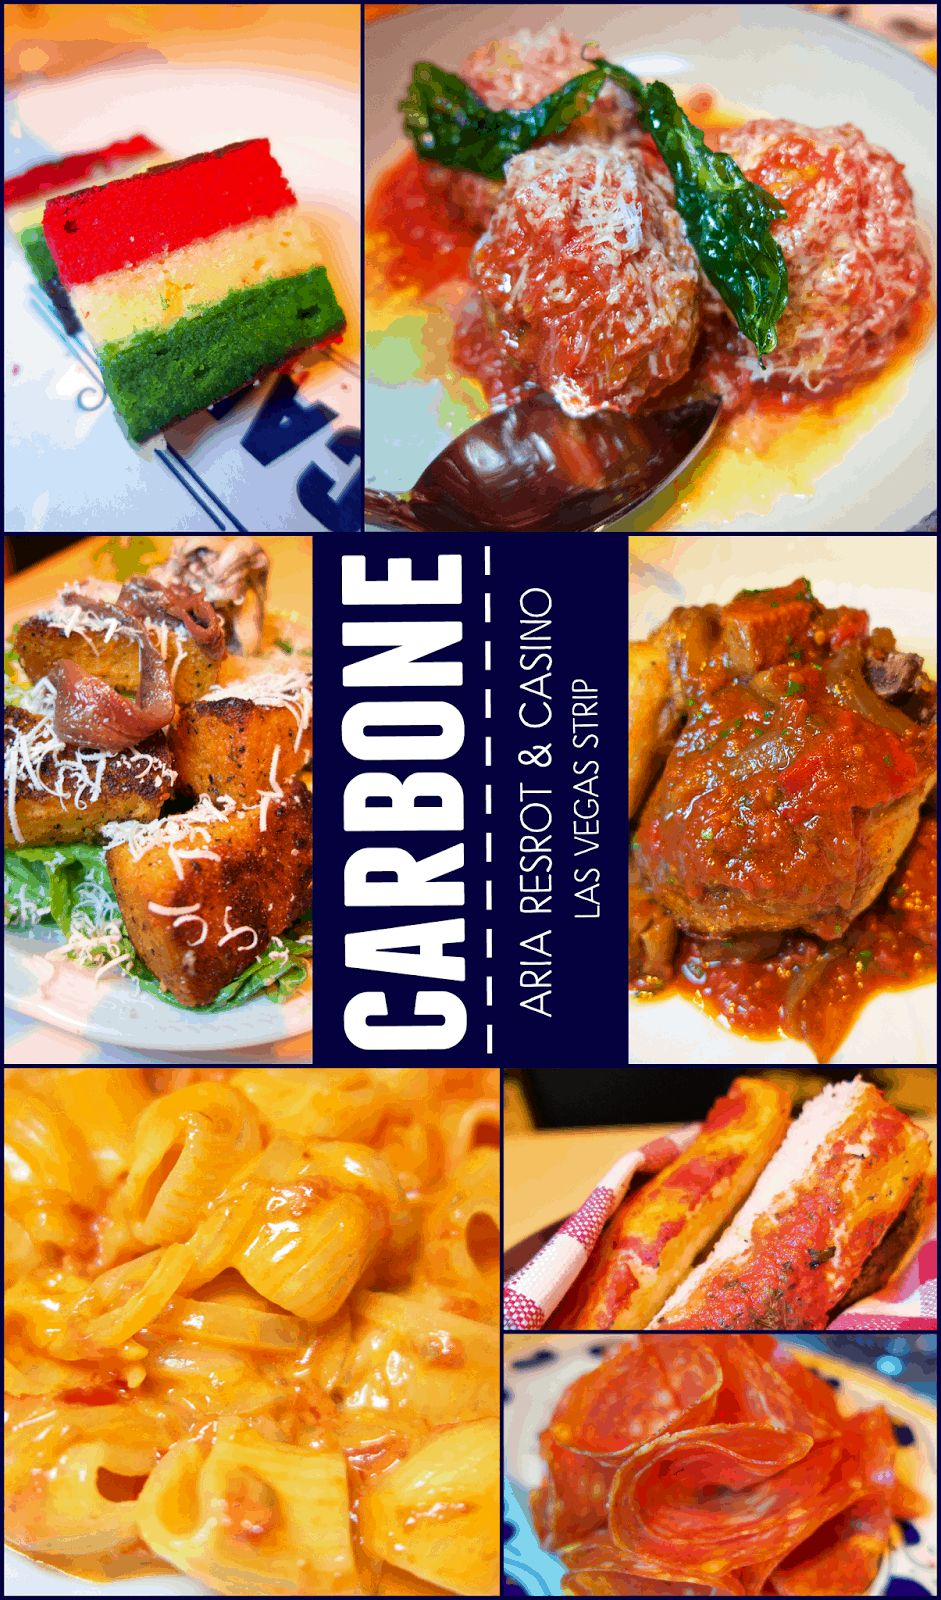 Carbone Las Vegas - one of the best places we ever eaten at in Las Vegas. Italian food at its finest. Old school atmosphere. The food and service was second to none. We already have a reservation for our next trip! SOOO good!